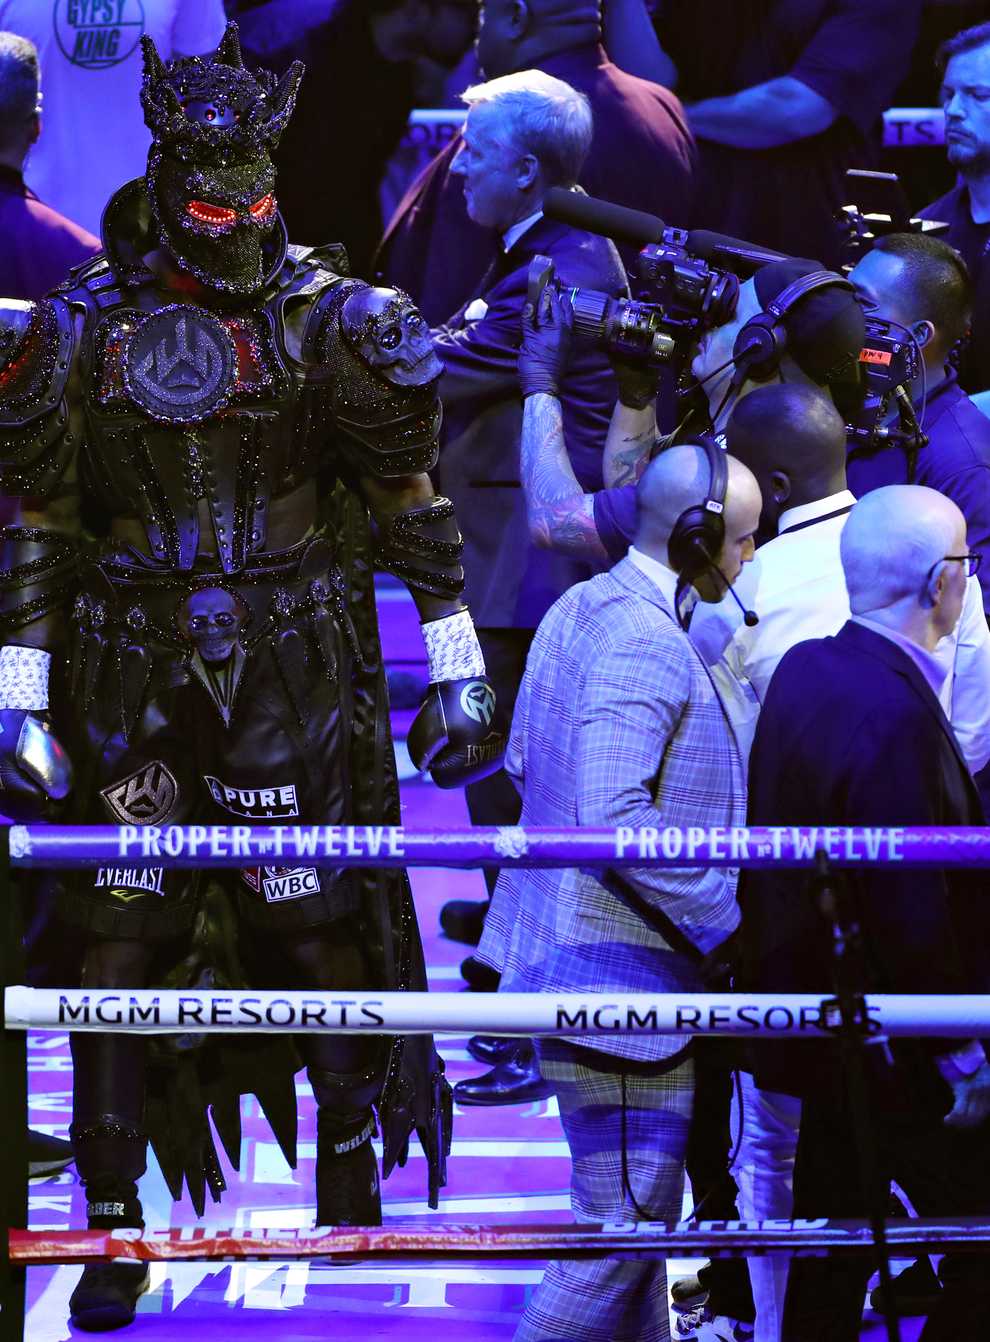 Wilder slowly made his way to the ring draped in his costume and mask (PA Images)